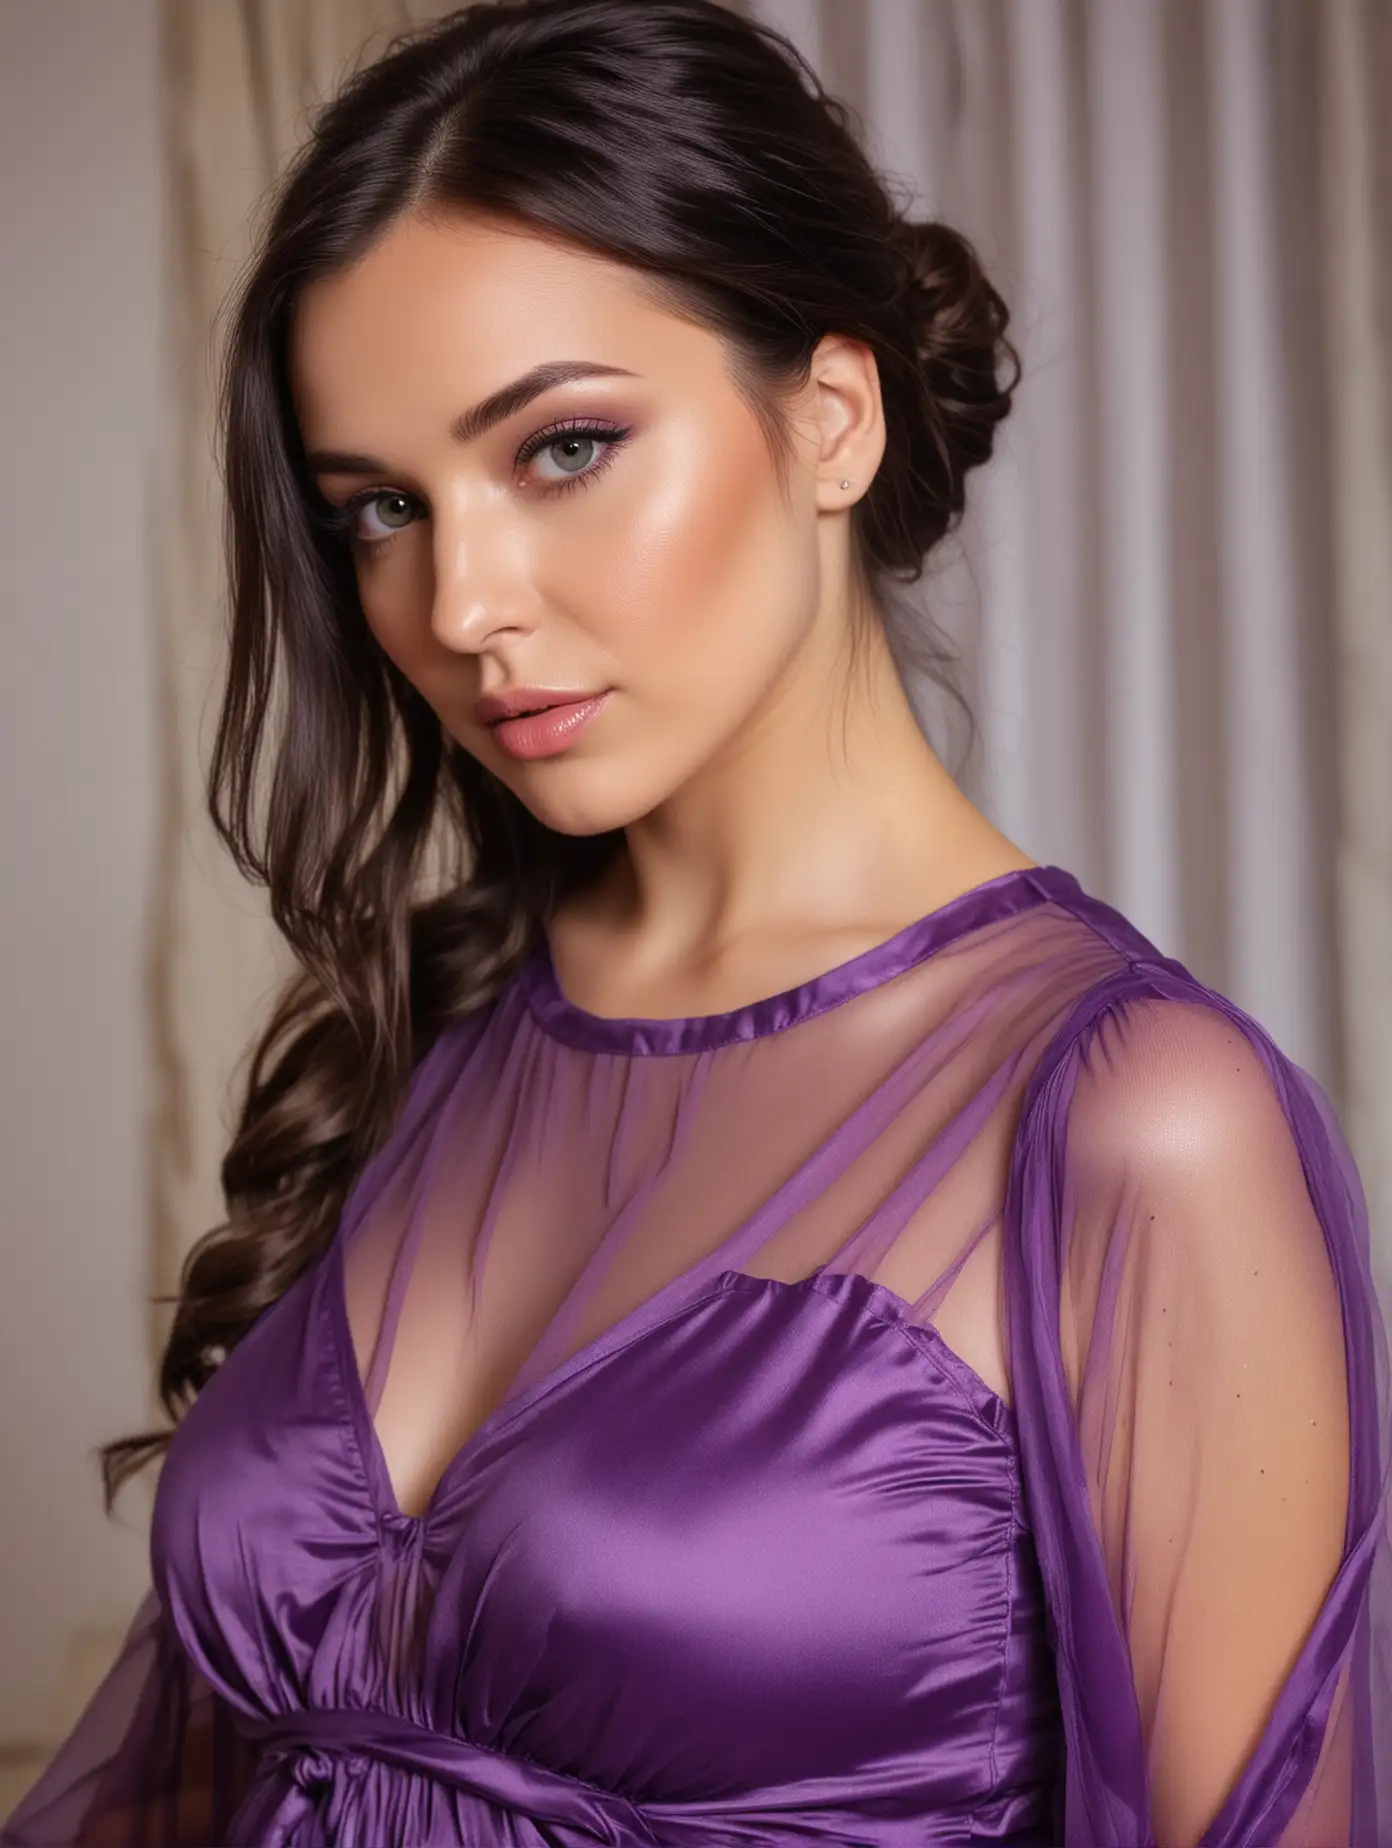 Sexy  Ukraine girl ,Exquisite facial features ，beautiful pregnant woman in purple satin dress with sheer sleeves，she has dark brown hair and is looking into camera